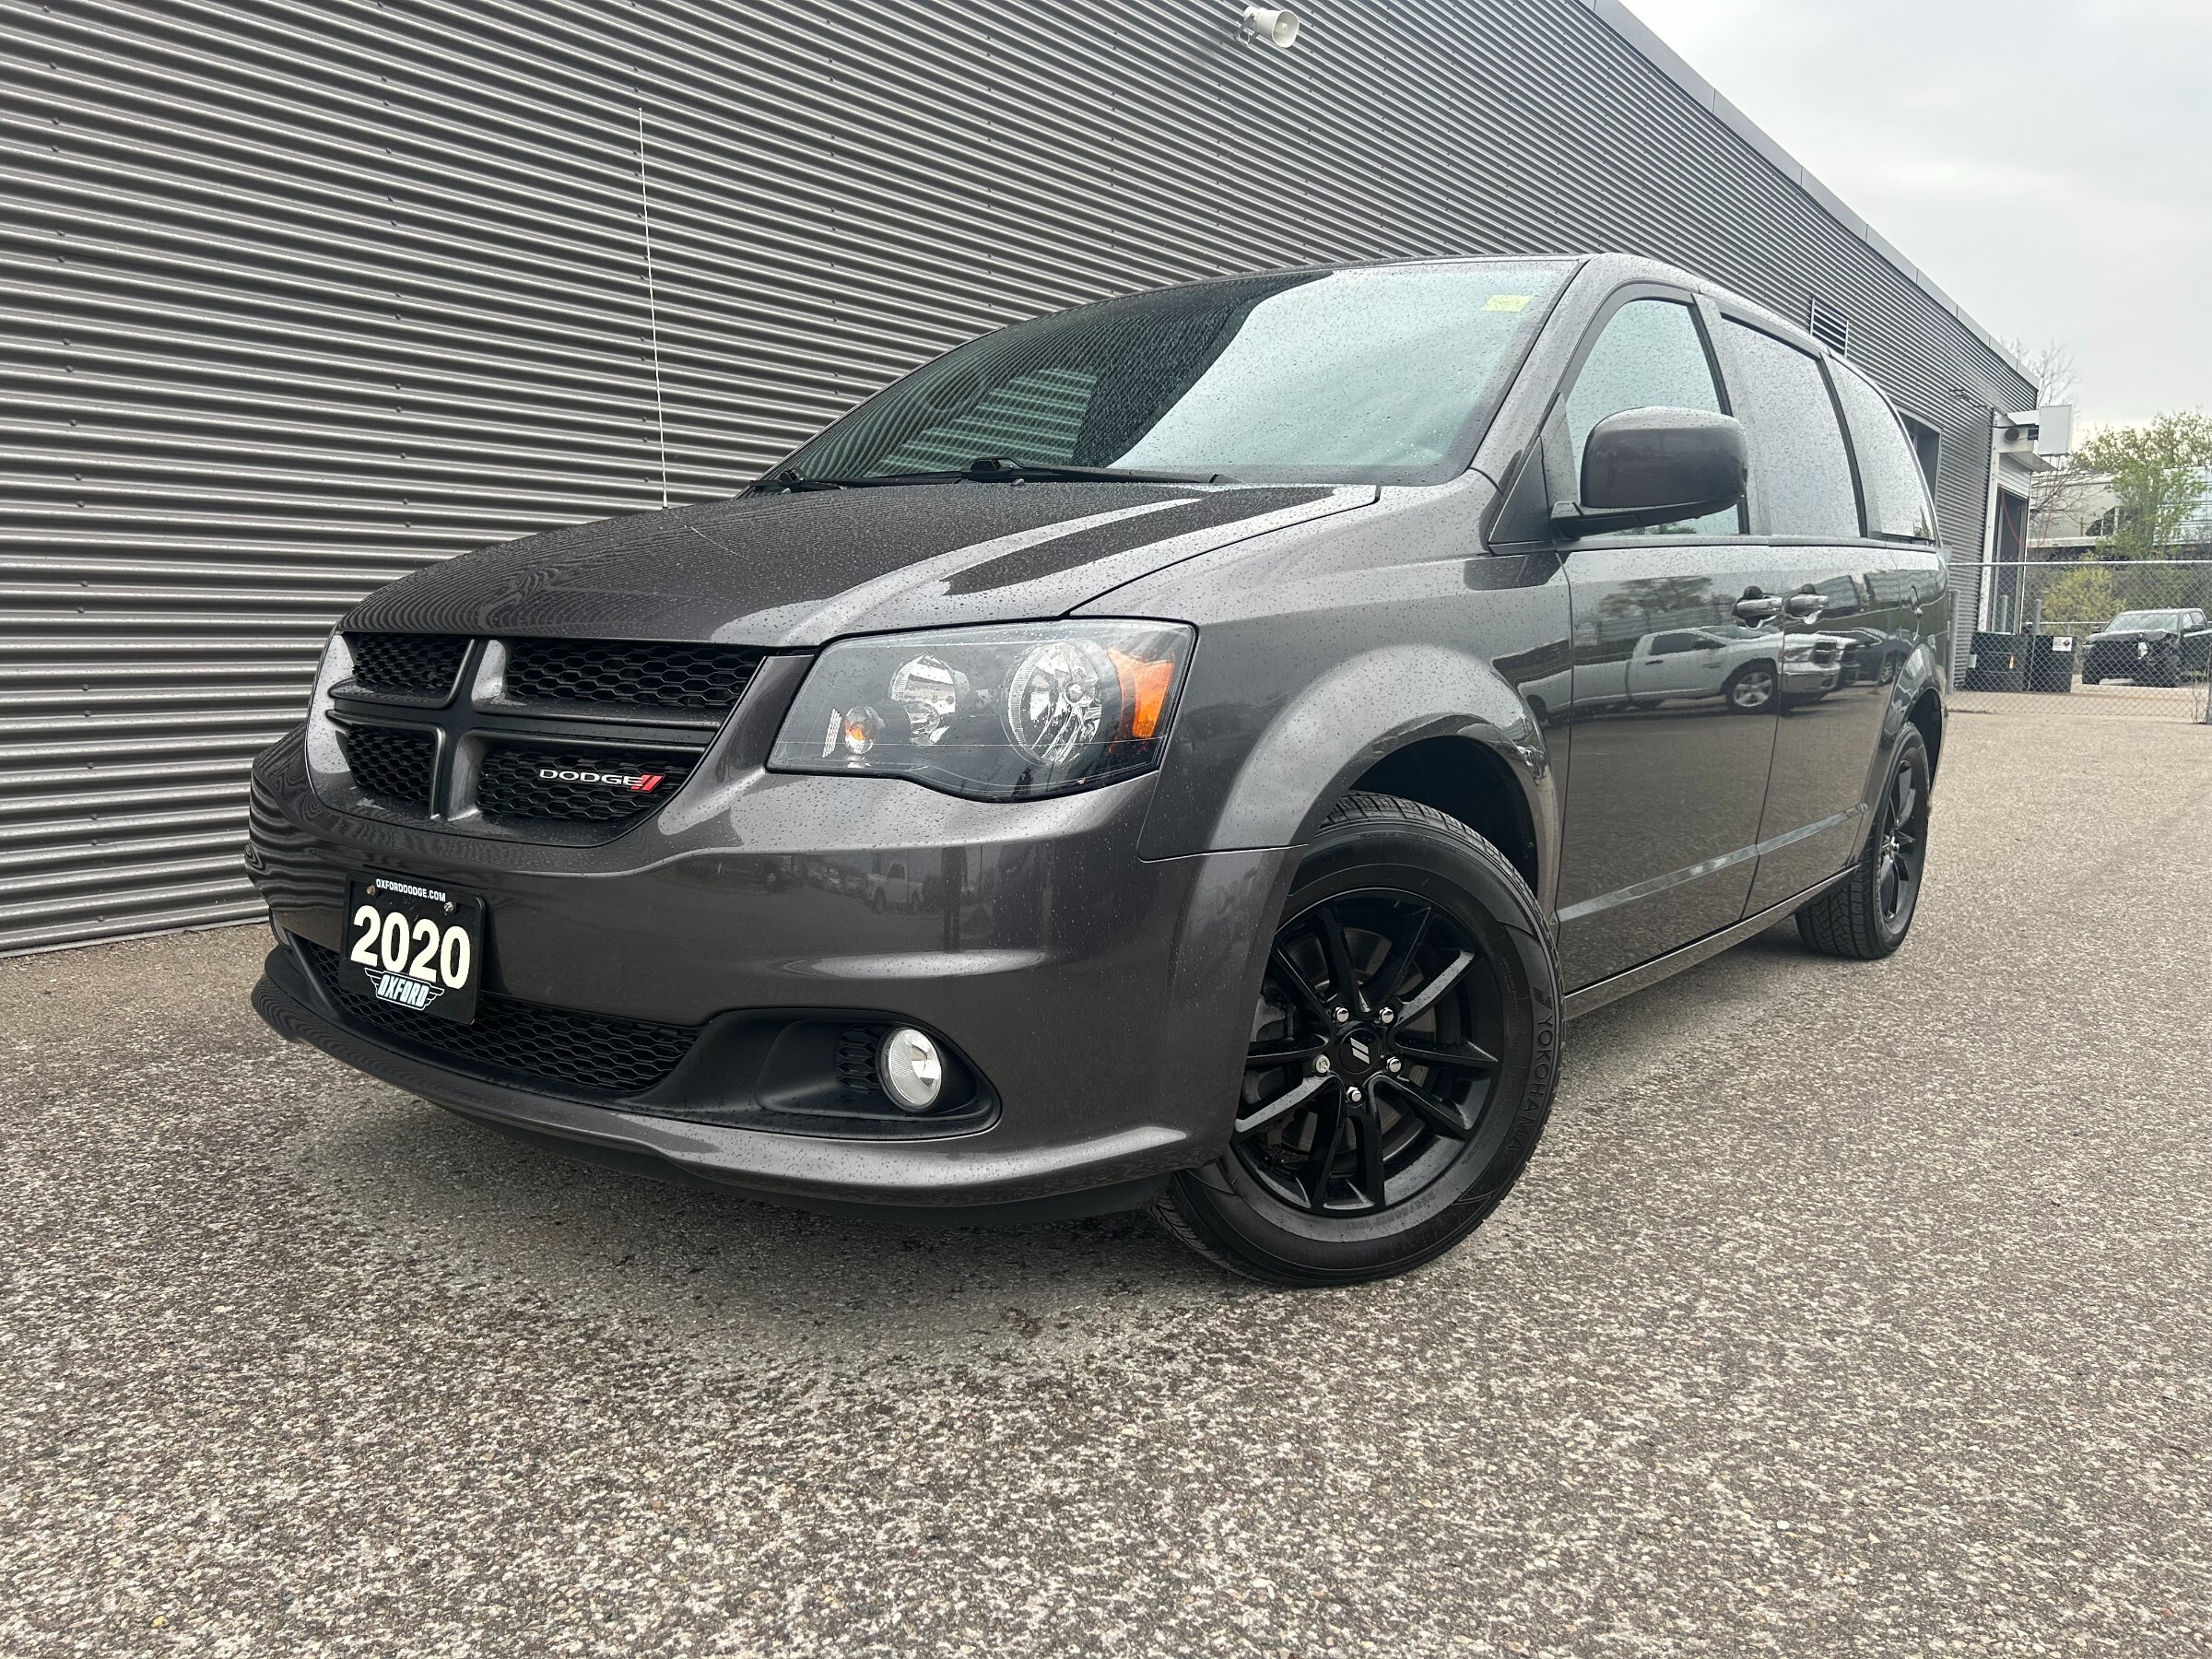 2020 Dodge Grand Caravan GT CLEAN CARFAX, ONE OWNER, TOP OF THE LINE, SHARP